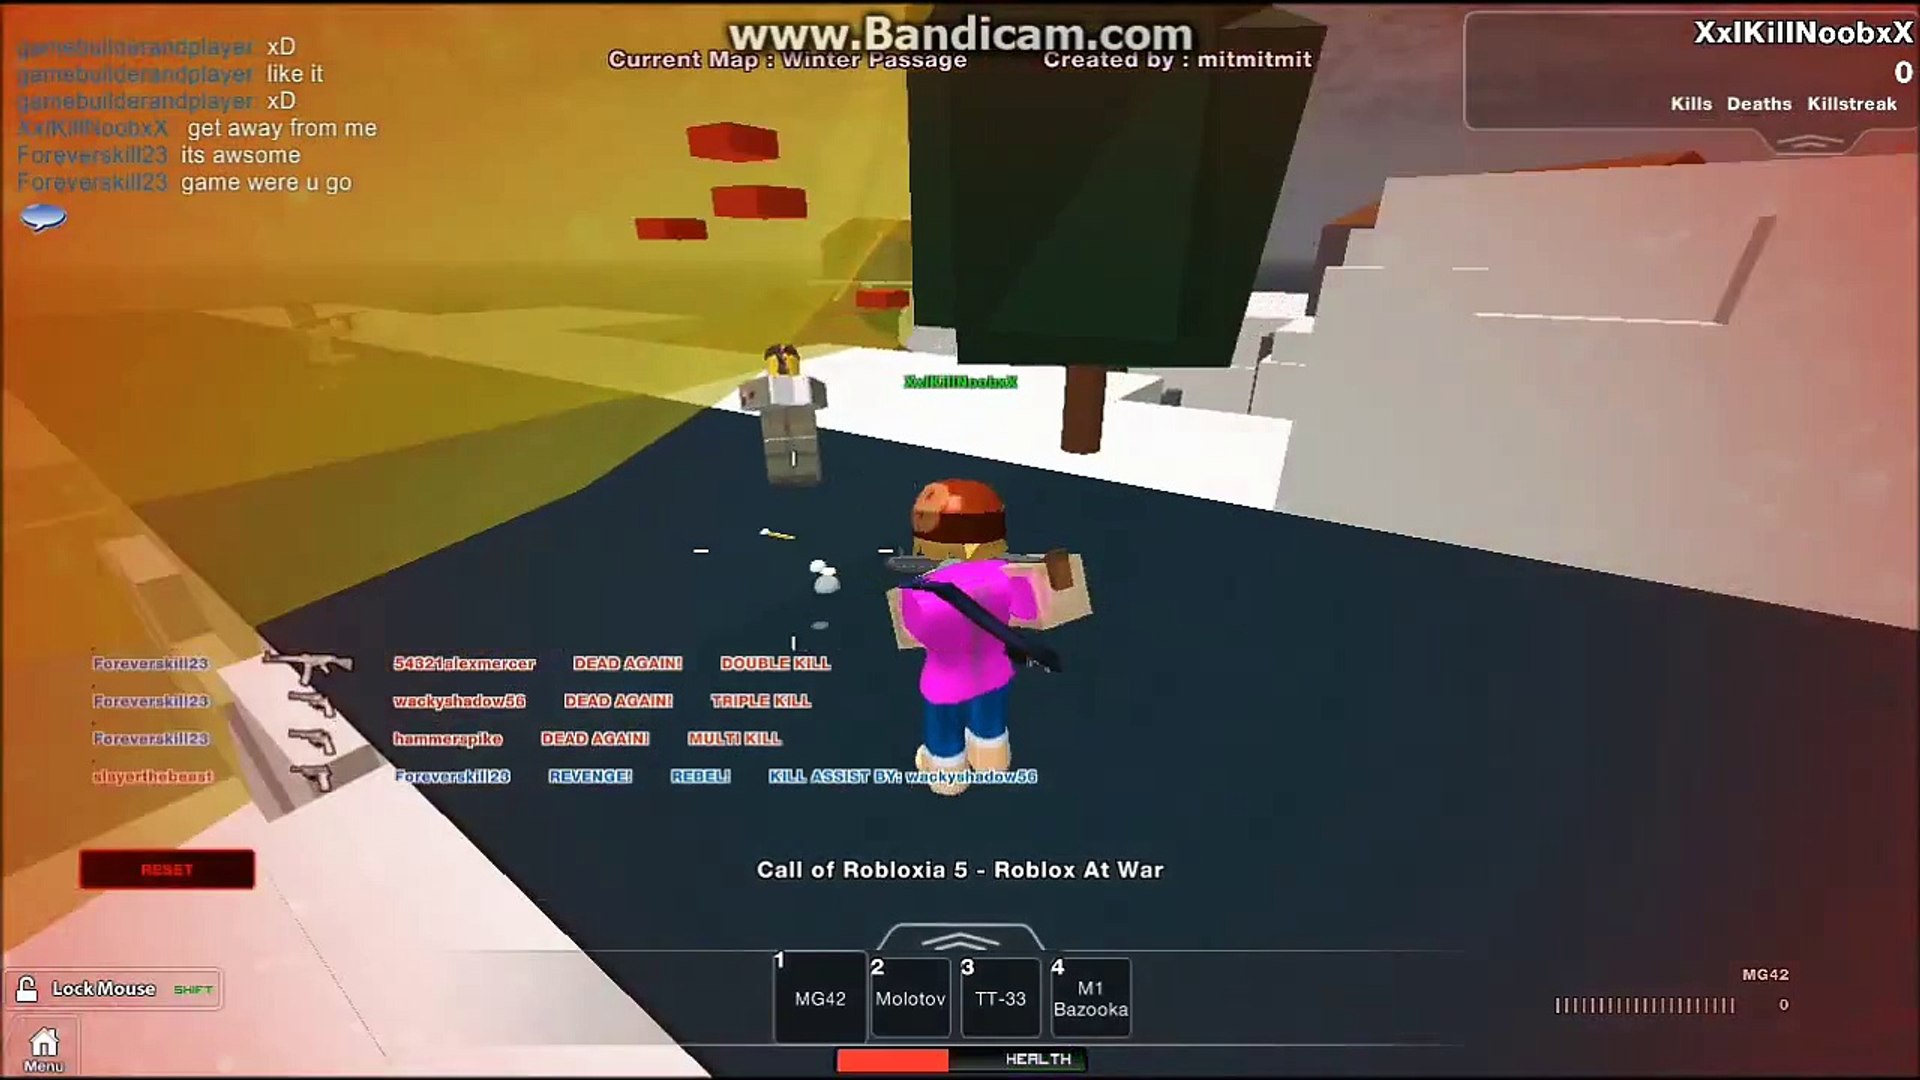 Roblox Call Of Robloxia 5 Roblox At War 2013 Hacks Video Dailymotion - of robloxia roblox